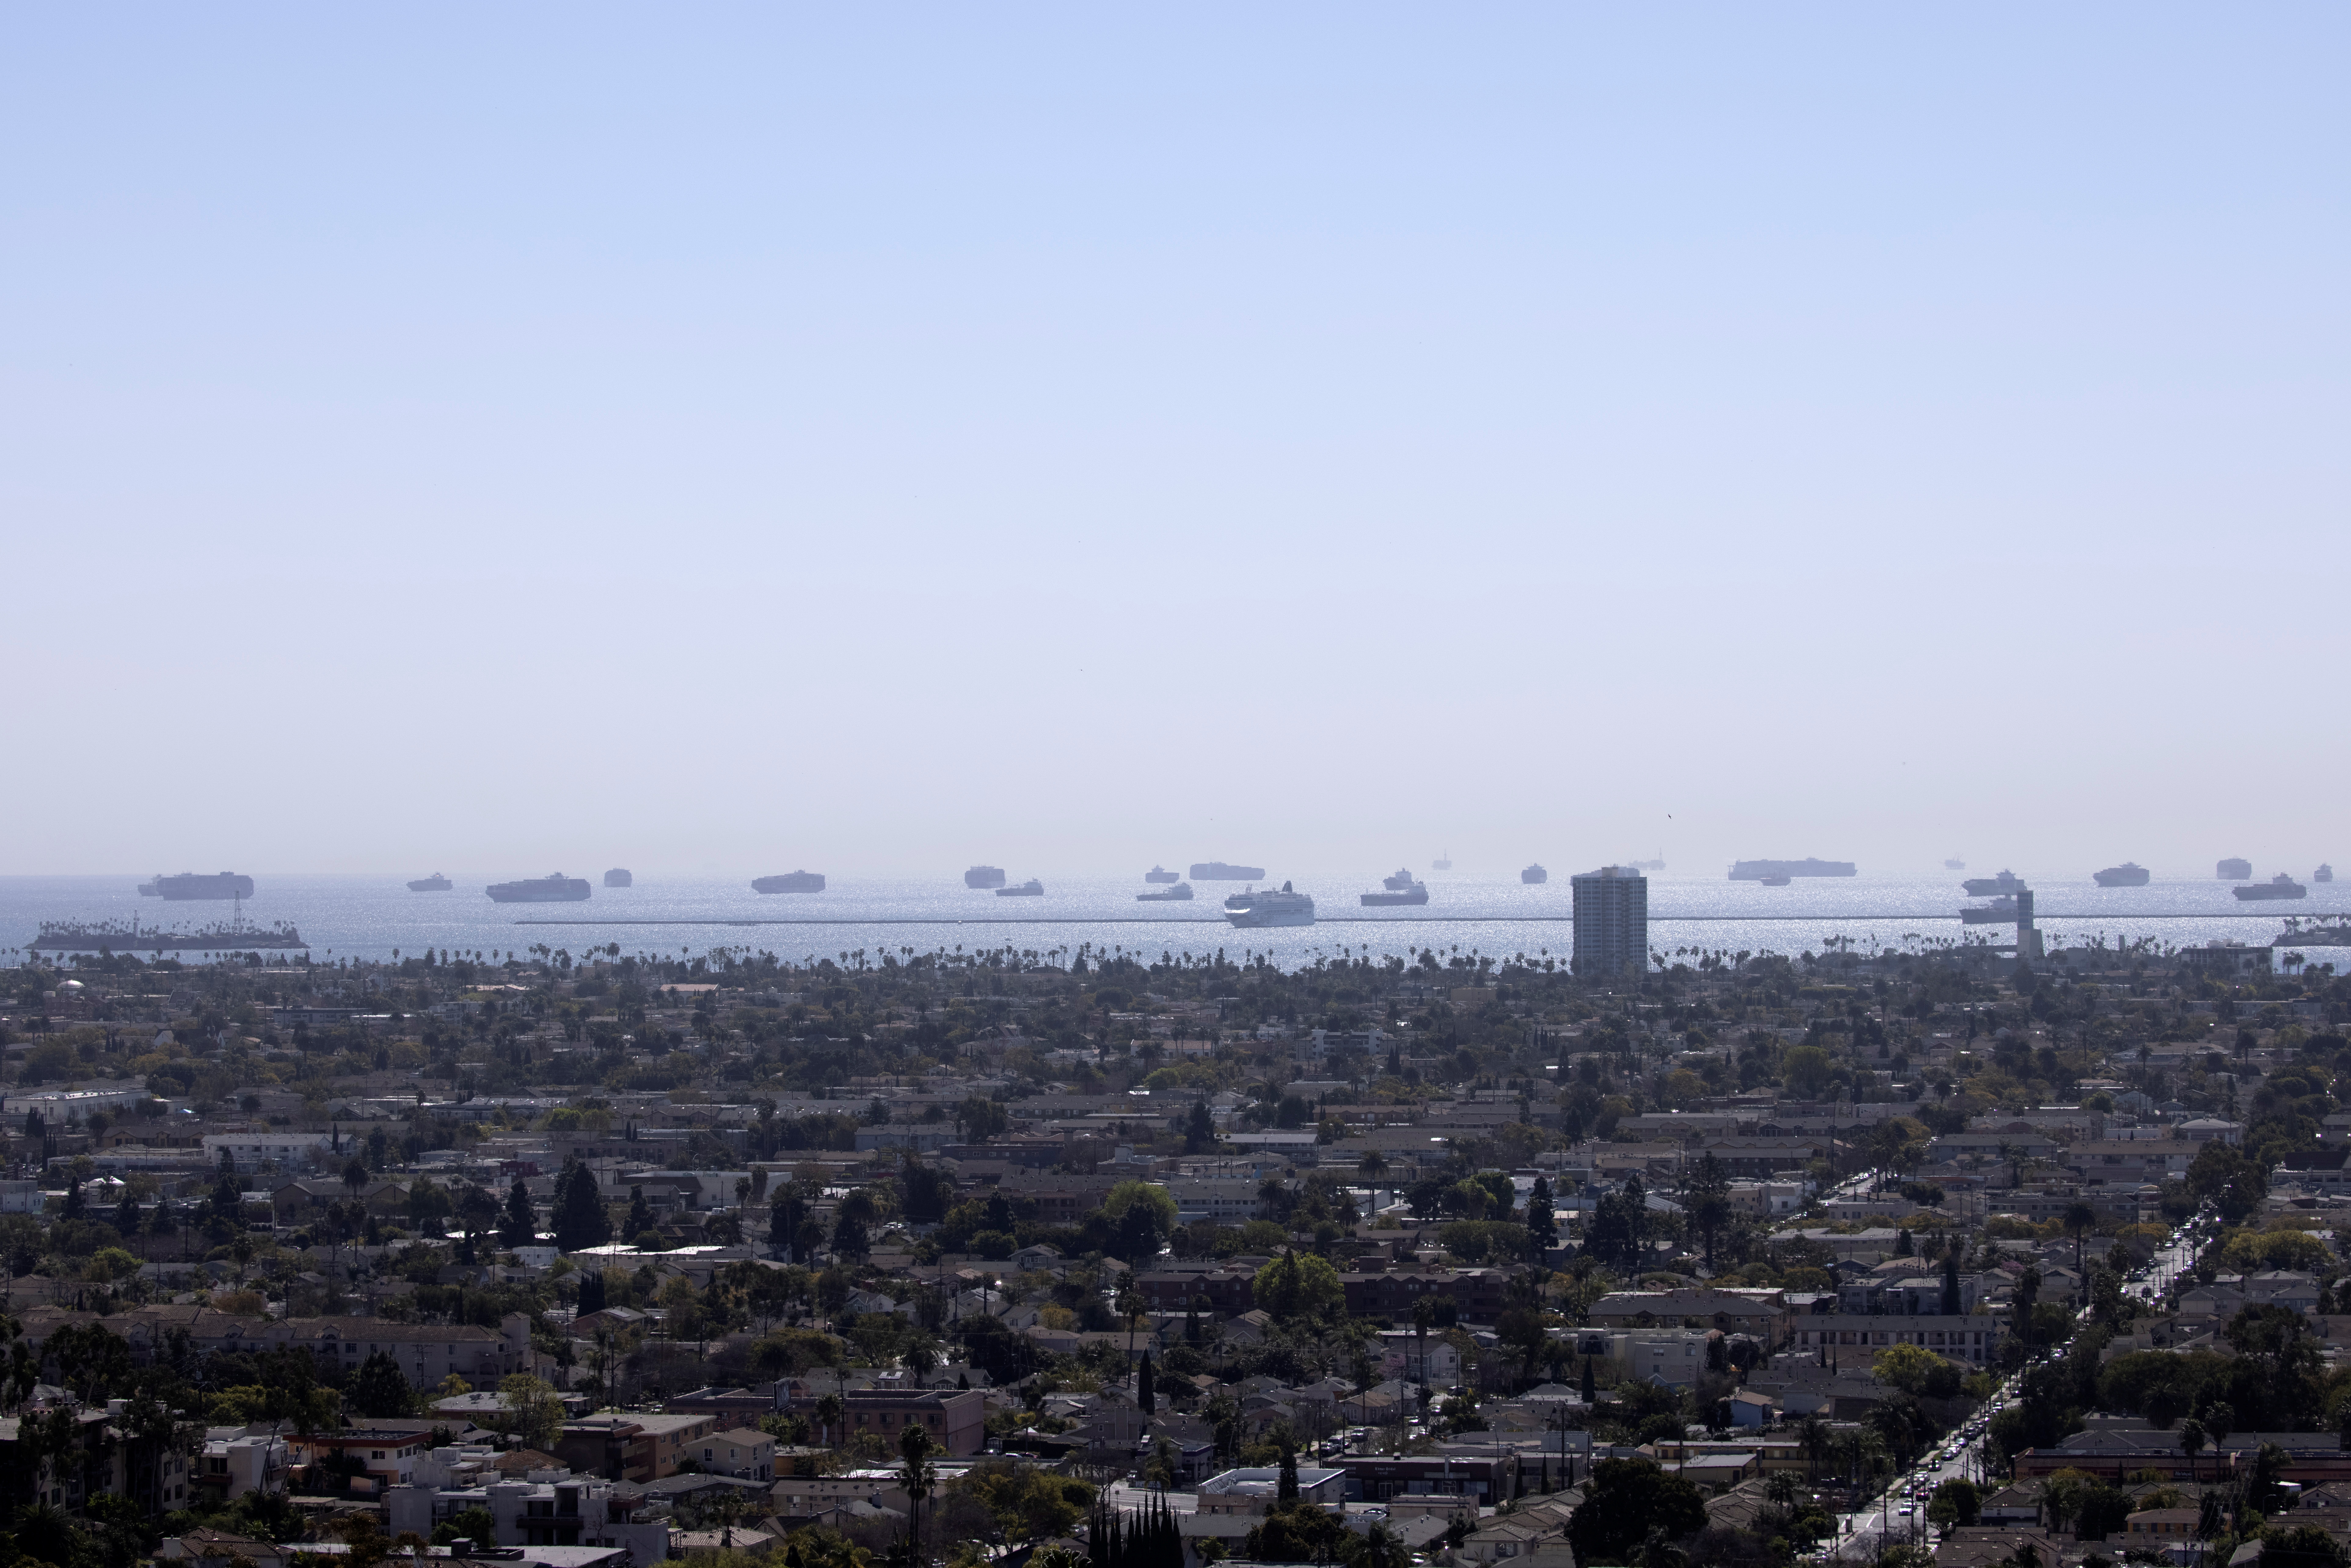 Dozens of container ships sit off the coast of Long Beach waiting to unload their cargo at the Port of Los Angeles in California